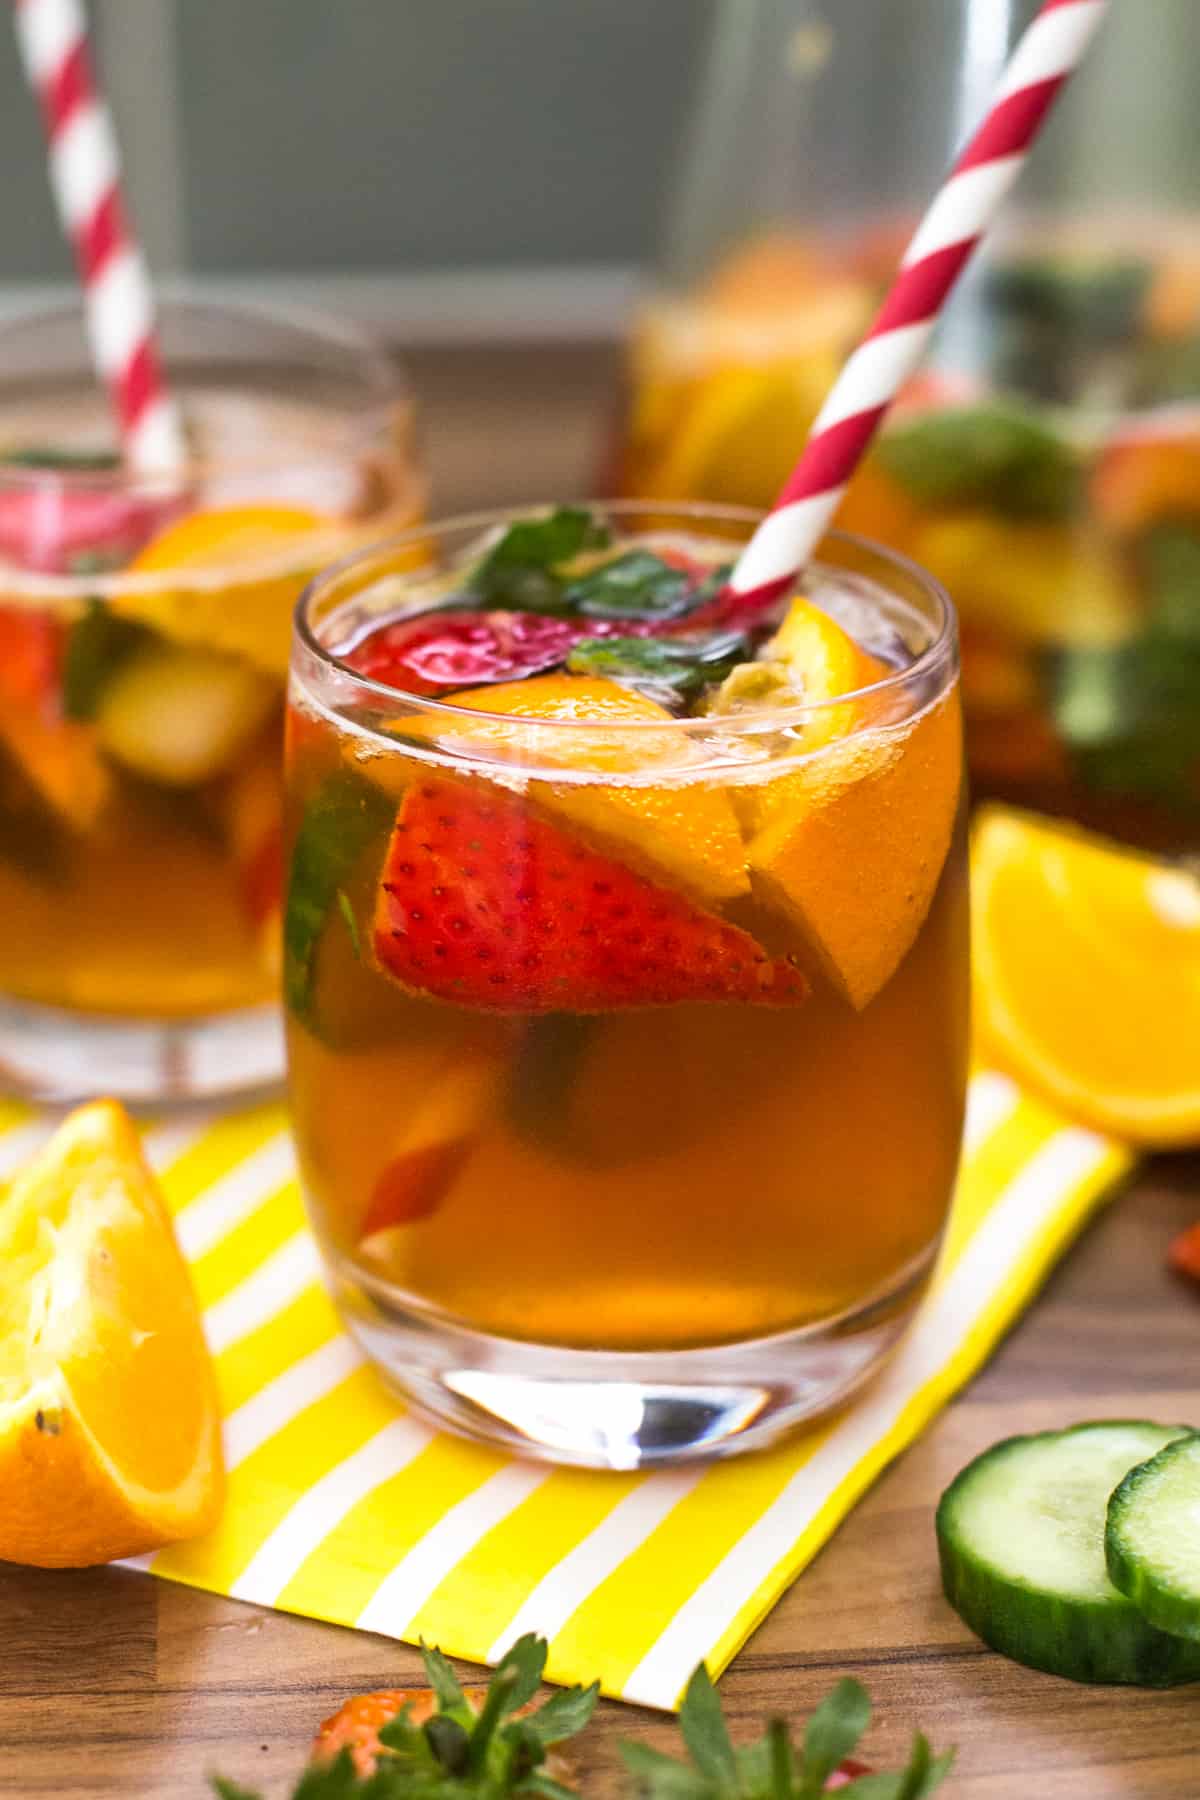 A small glass of Pimm's with strawberries, cucumber and oranges.